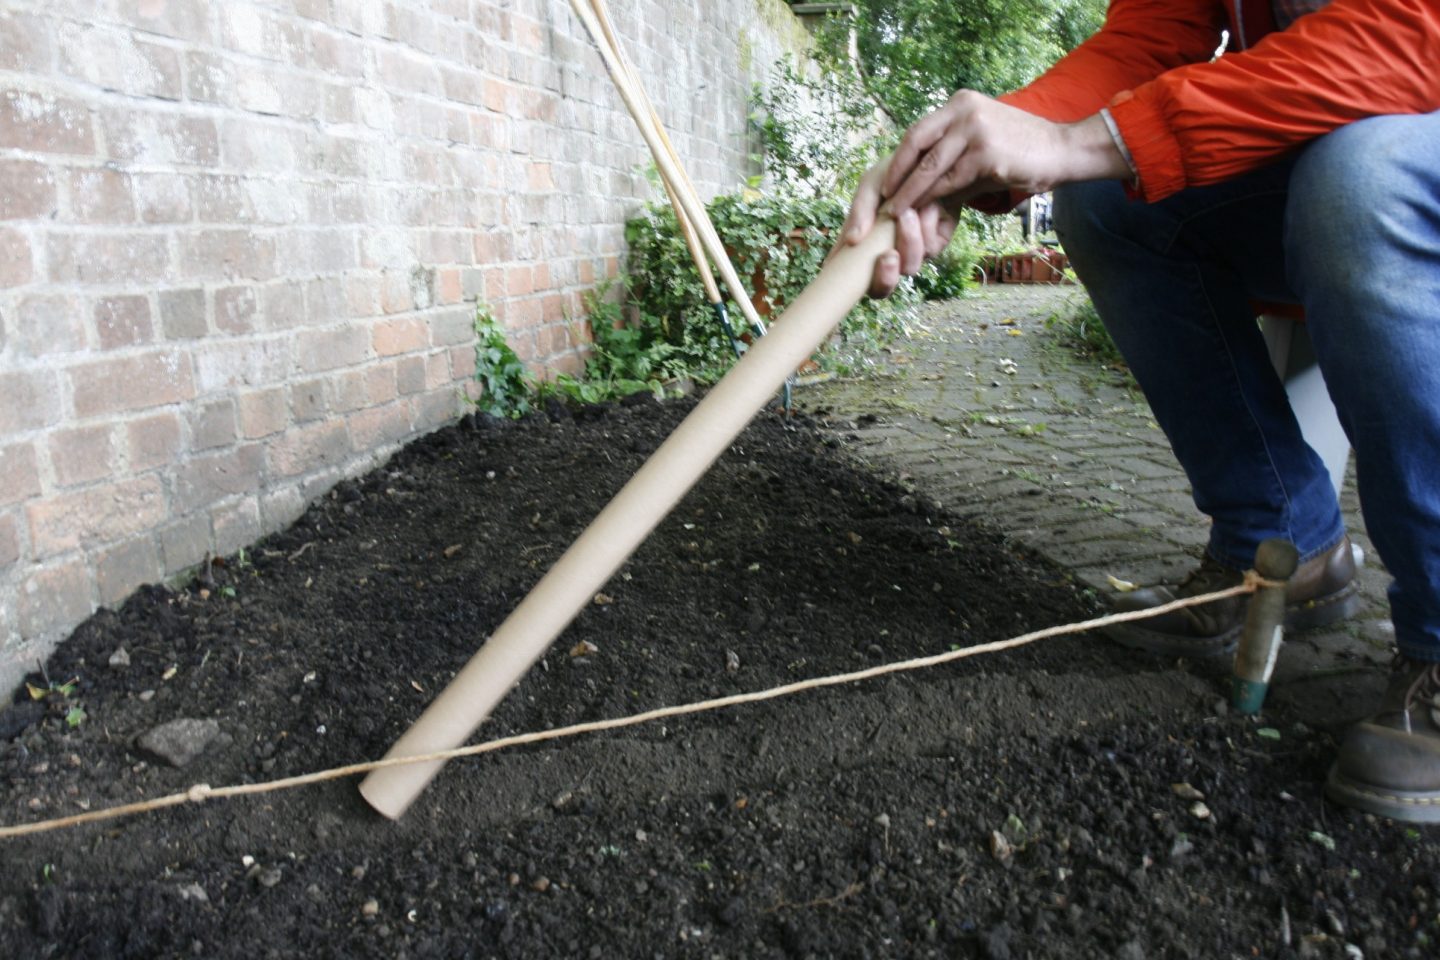 Sowing seeds in a drill using a long cardboard tube